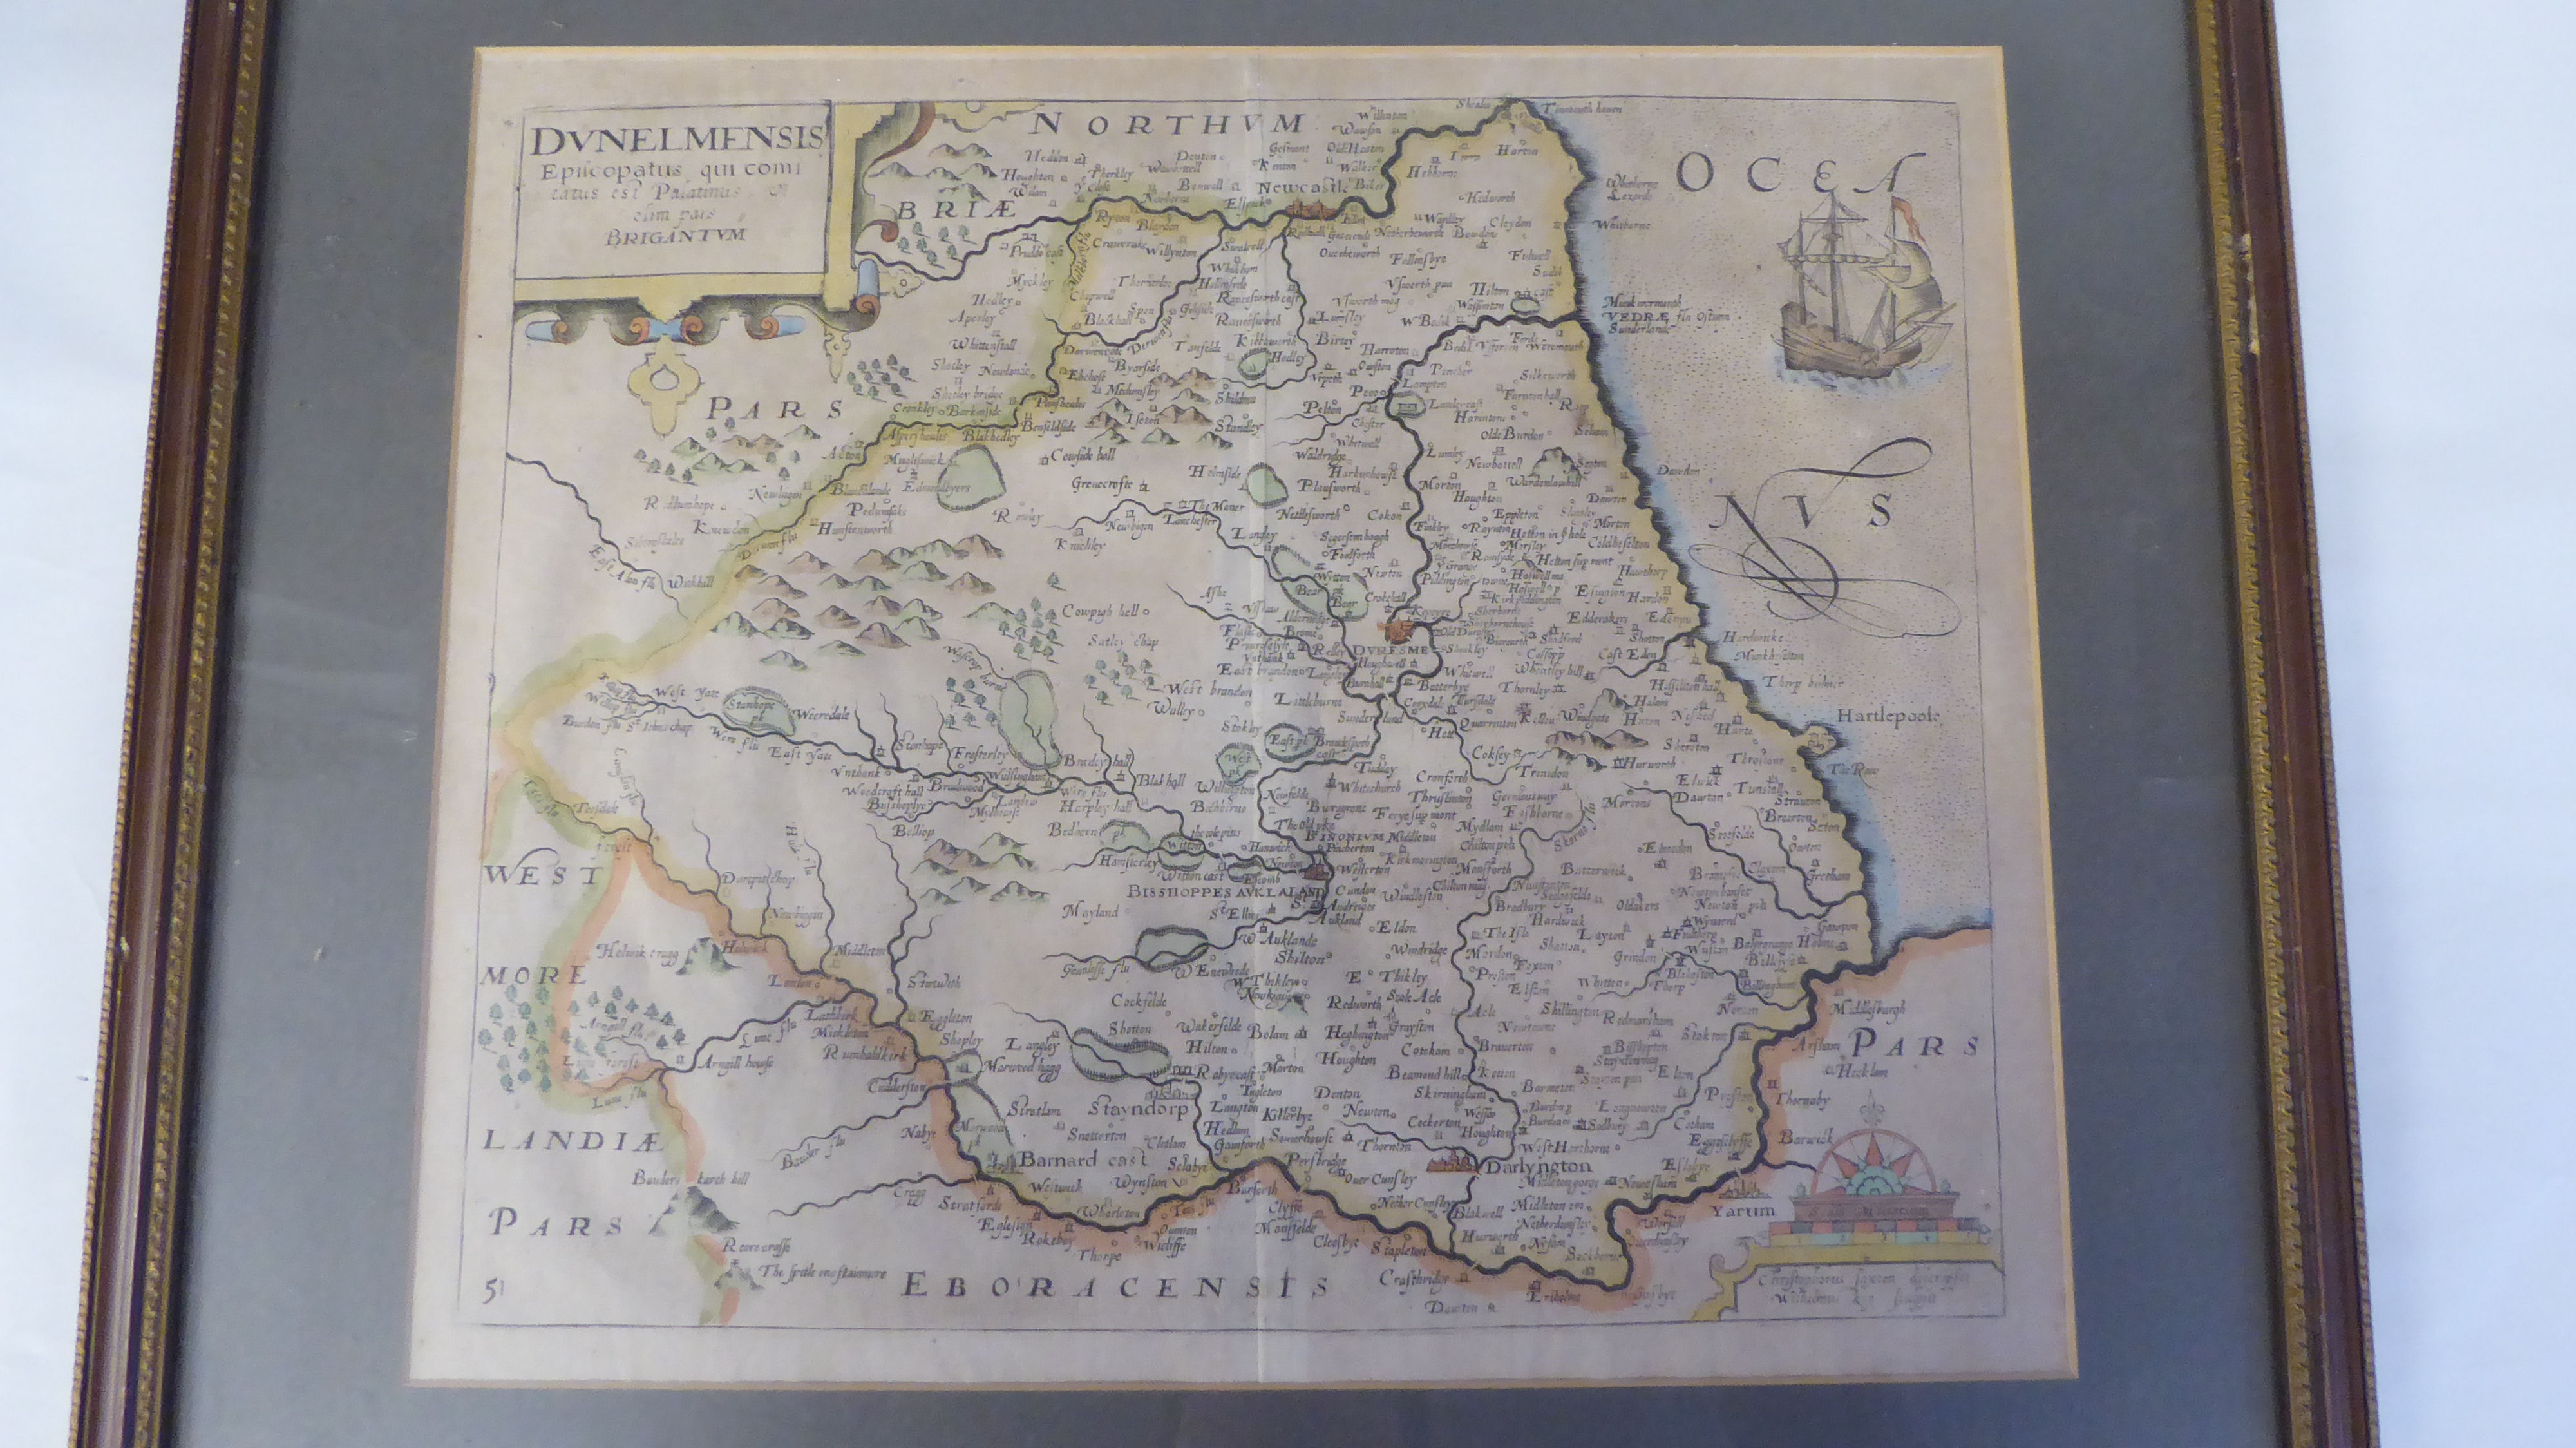 A 17thC Christopher Saxton coloured county map 'Dvnelmensis....Brigantvm' incorporating a ship in - Image 2 of 4